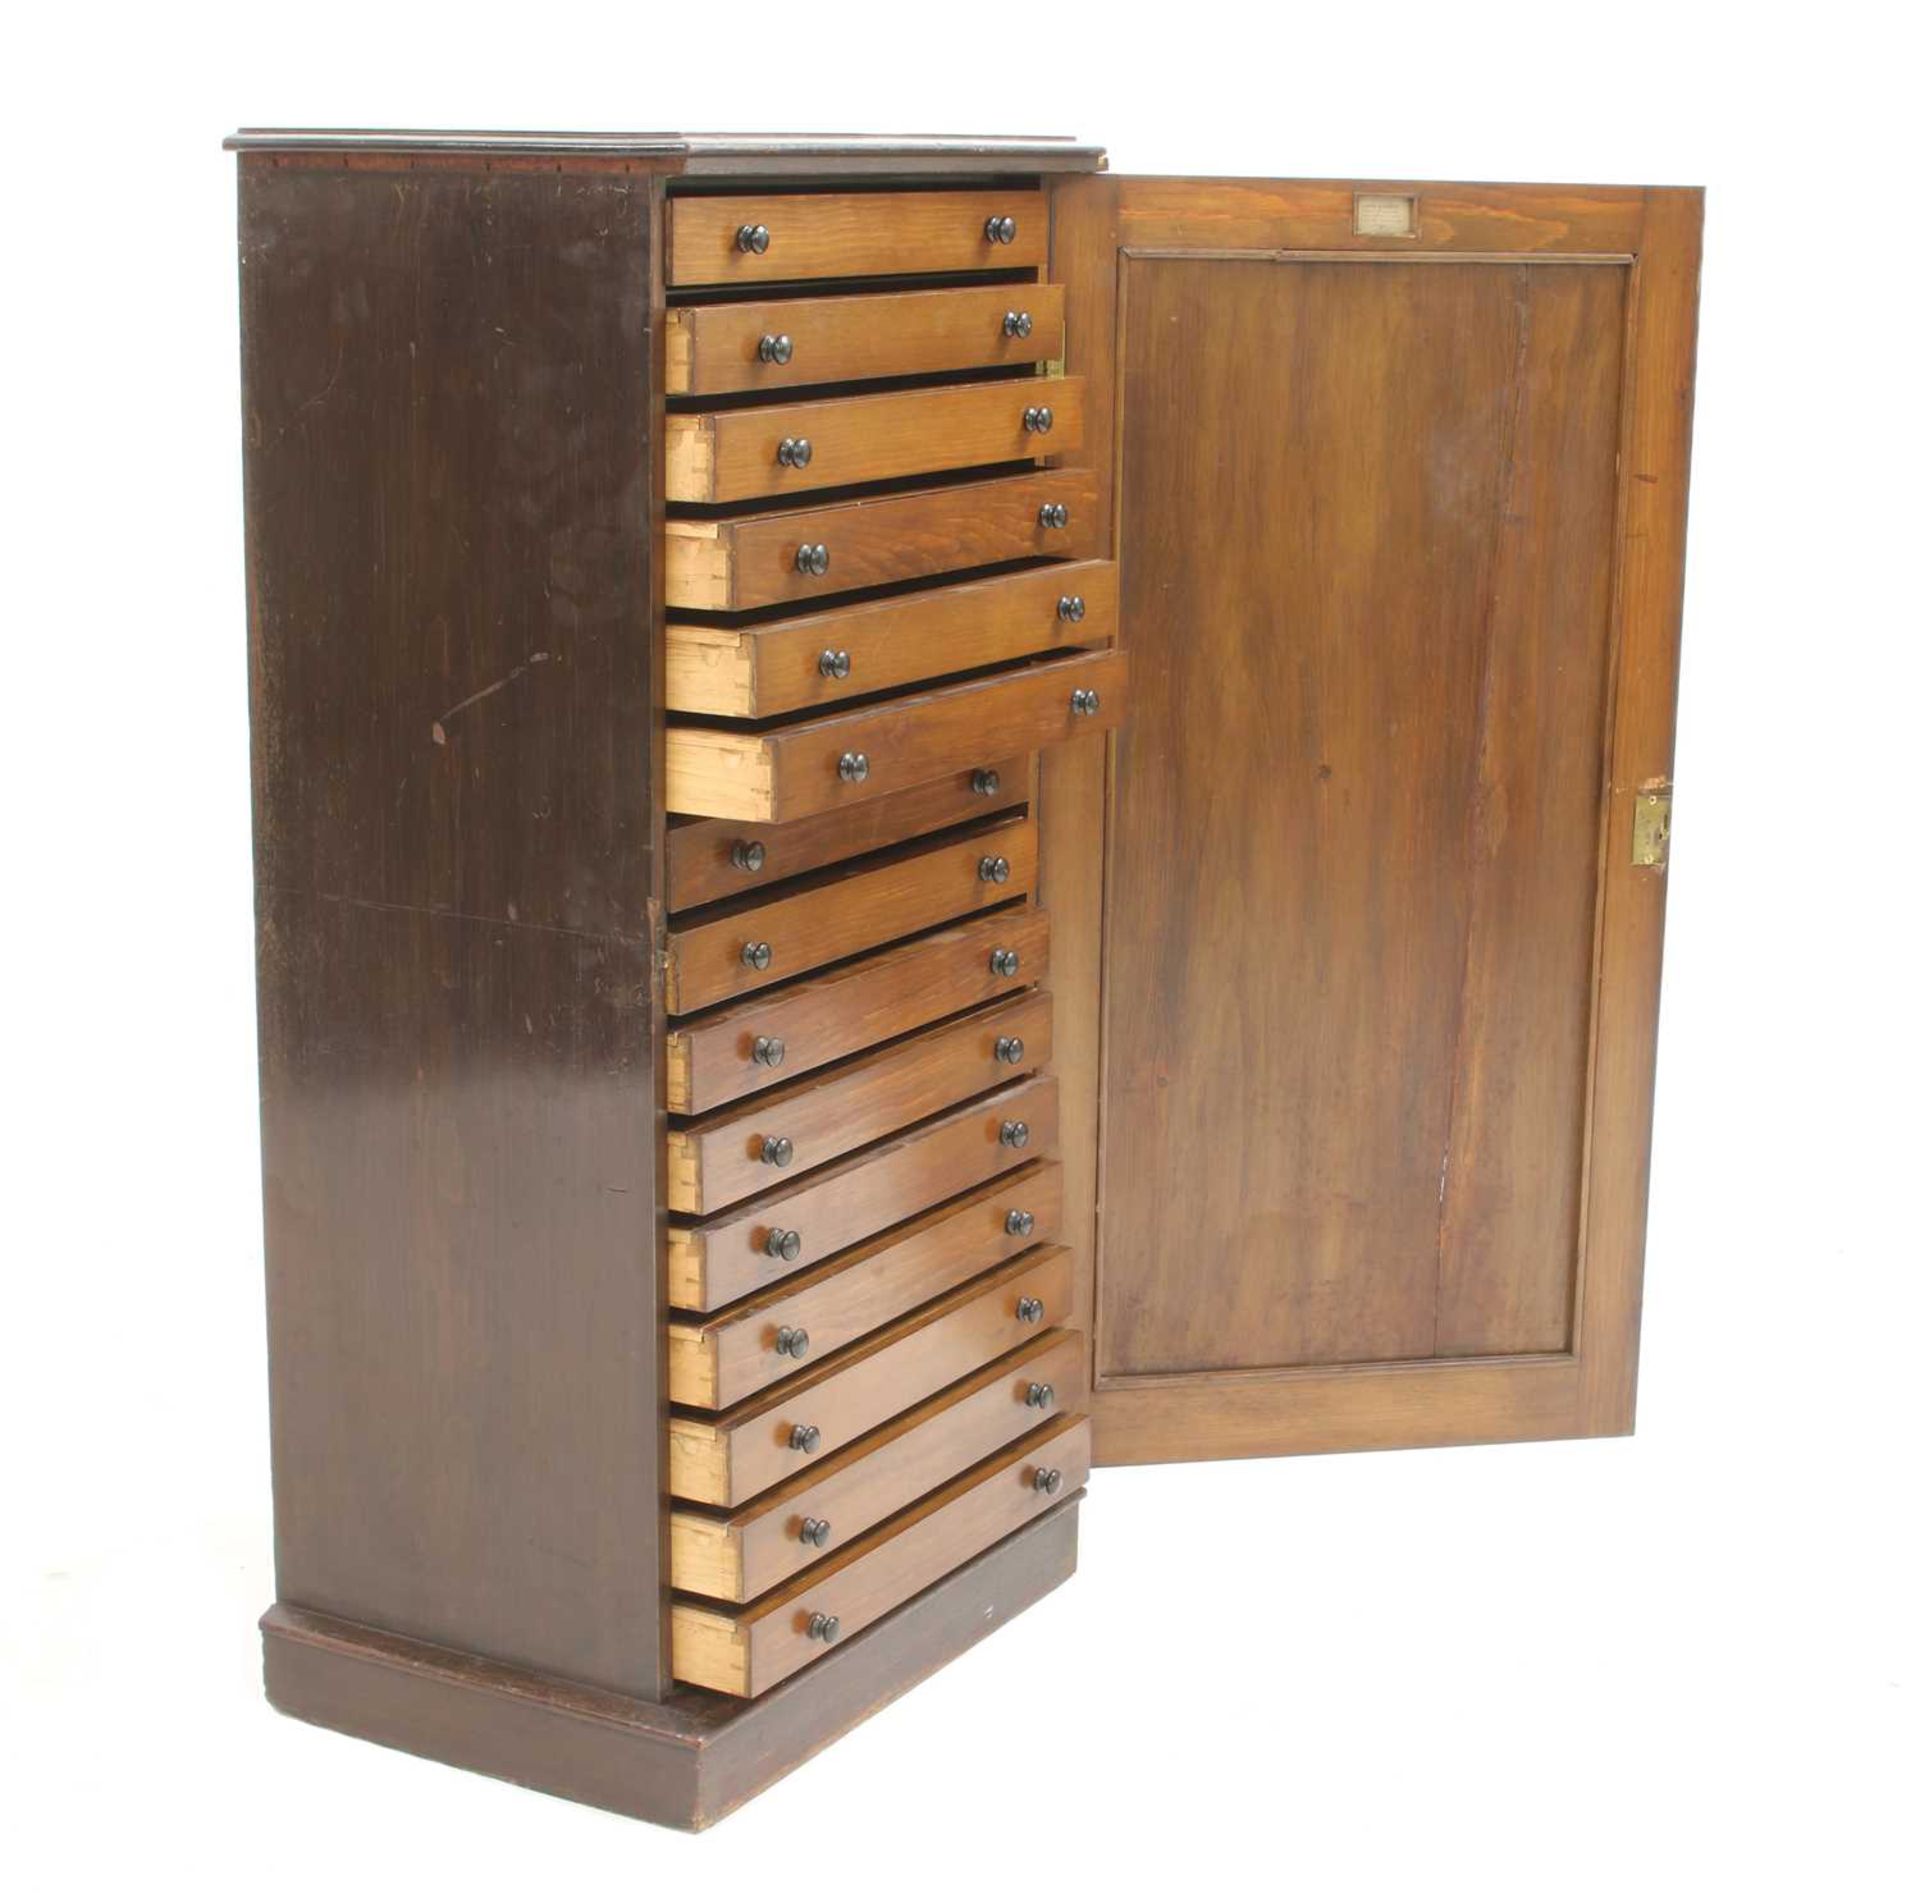 A beech collector's cabinet